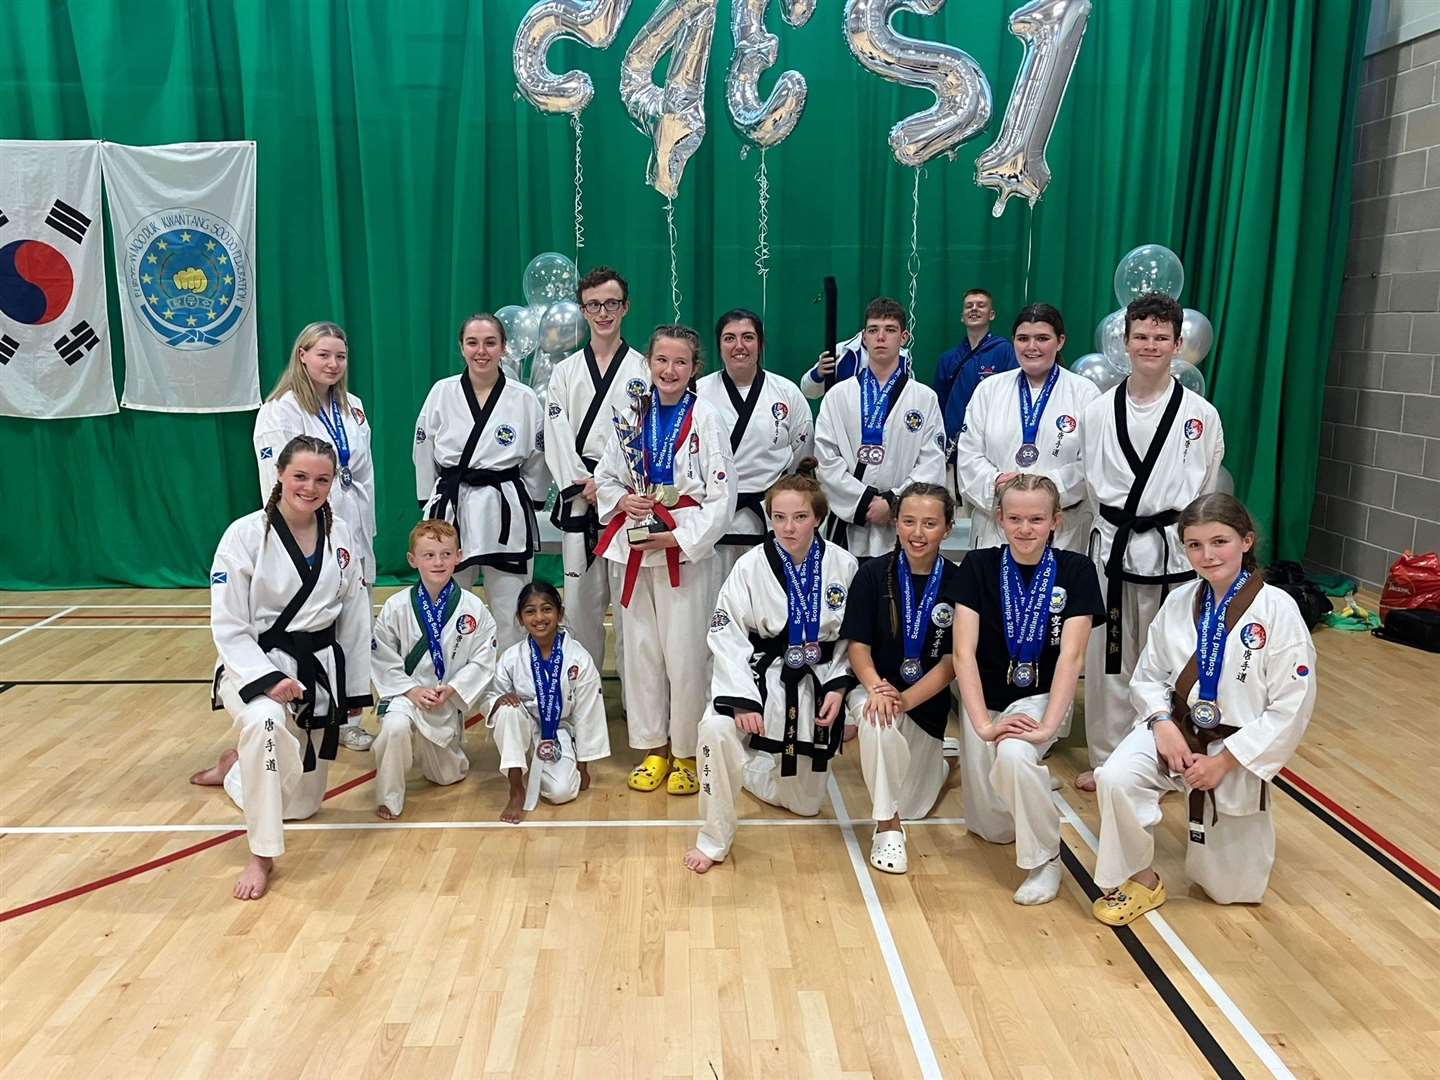 Inverness Tang Soo Do athletes who competed at Lossiemouth.